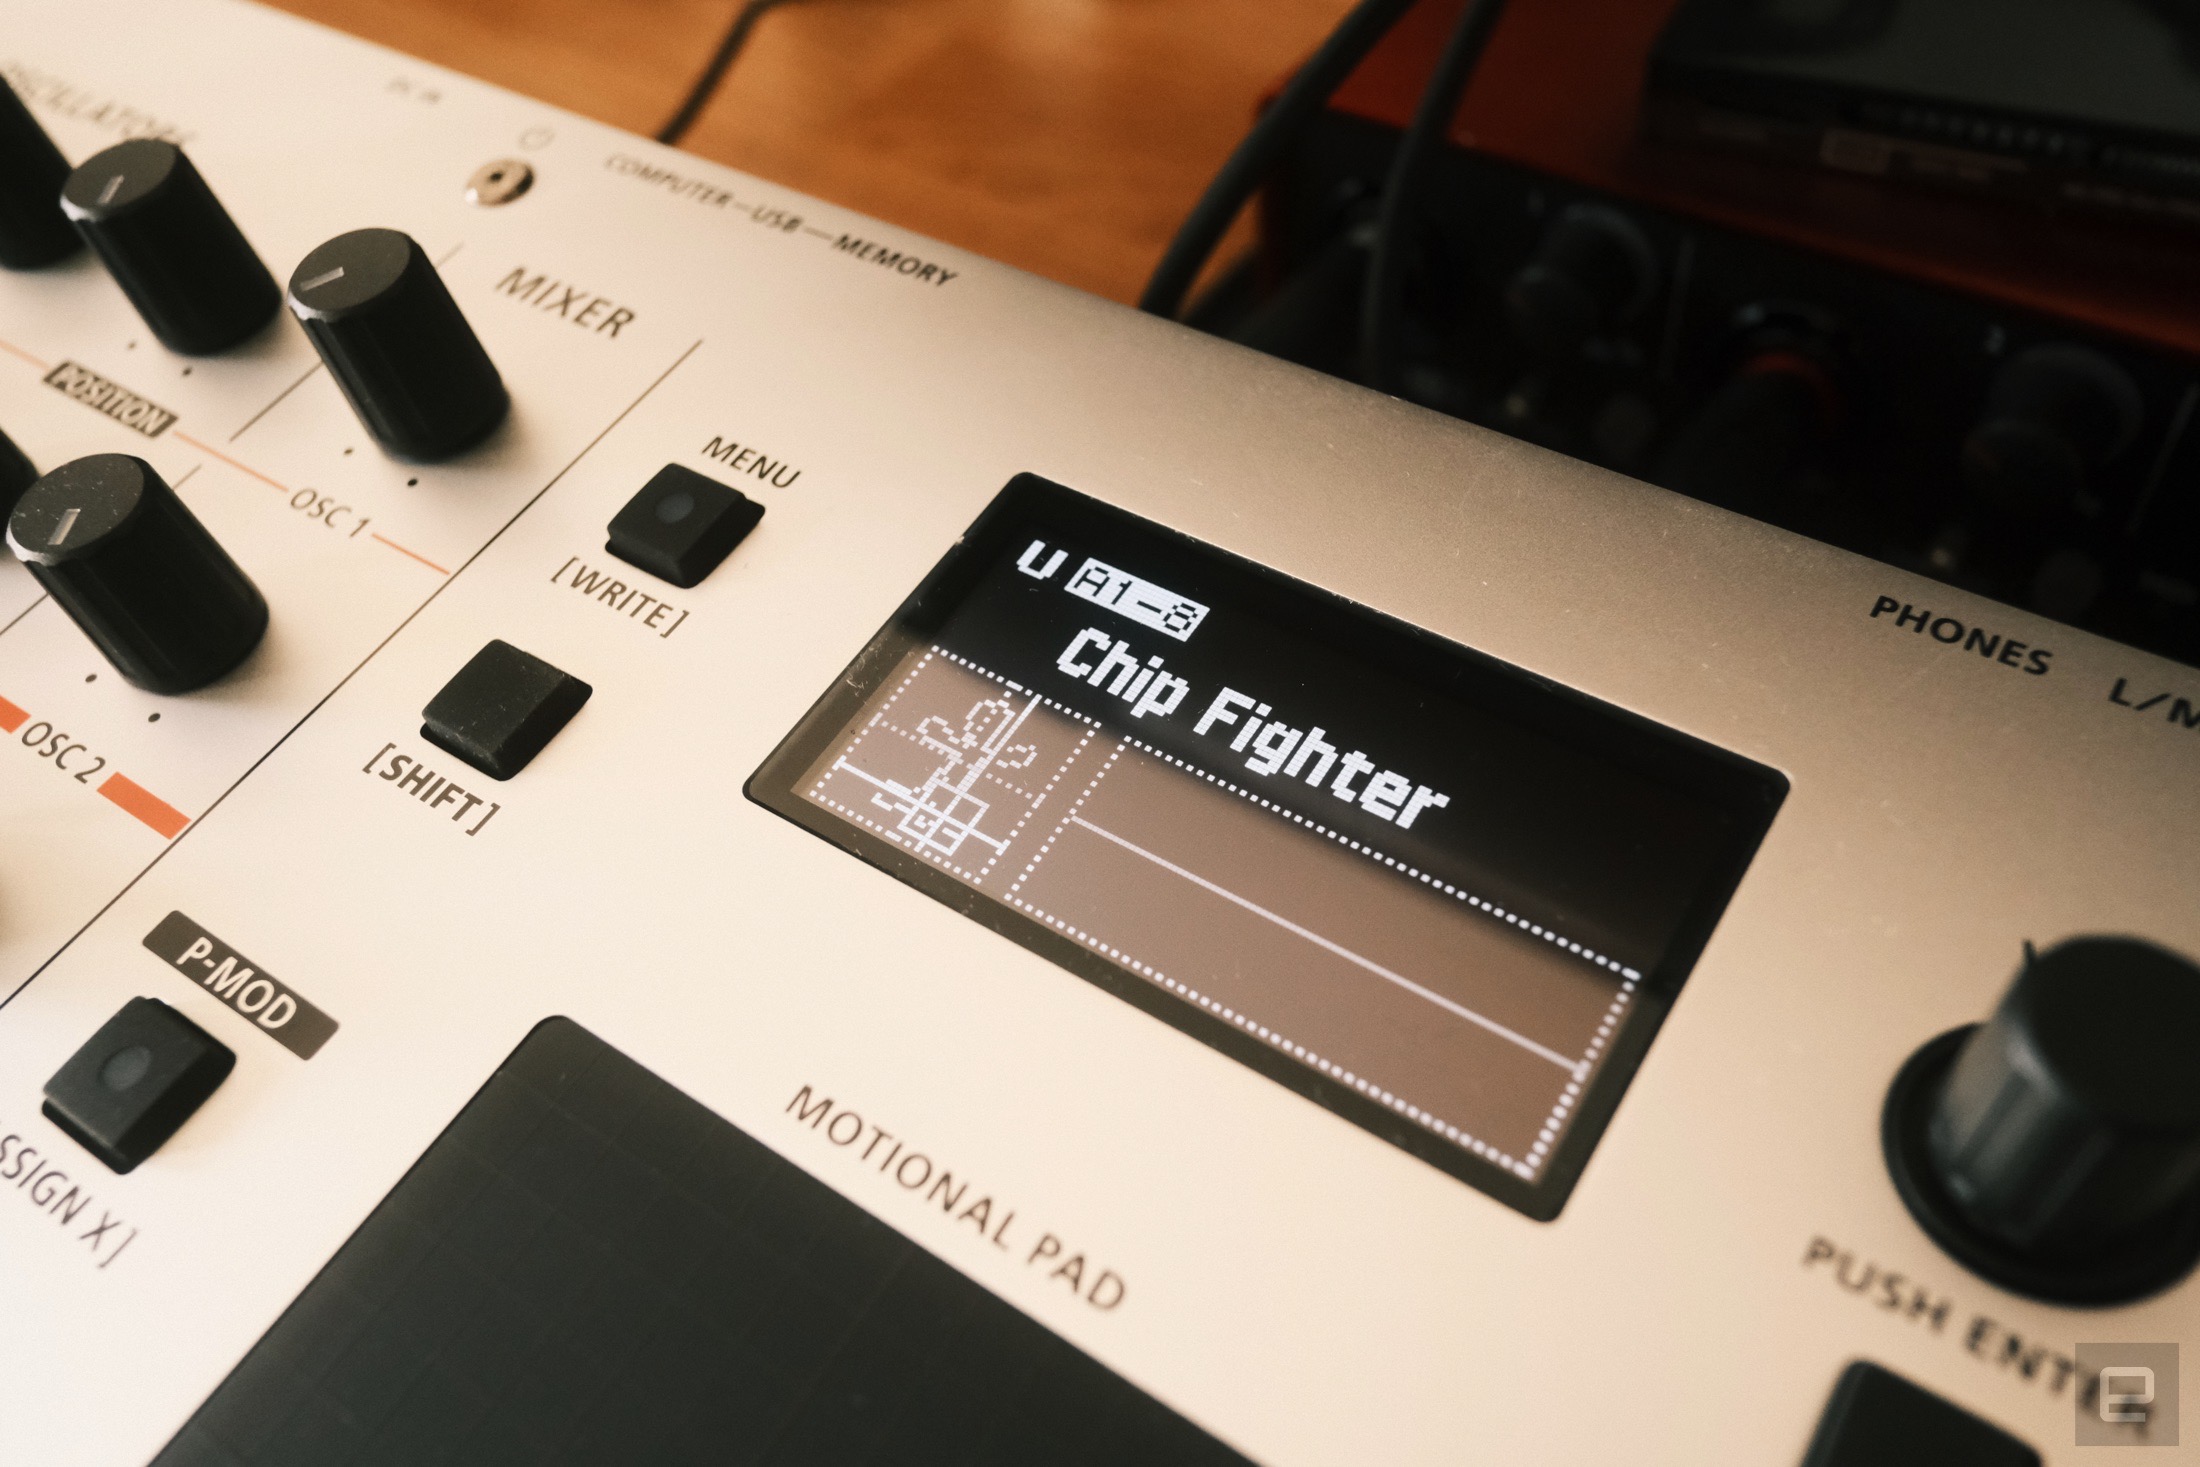 The Chip Fighter patch on the Roland Gaia 2 showing an automation sketching out a tiny person.